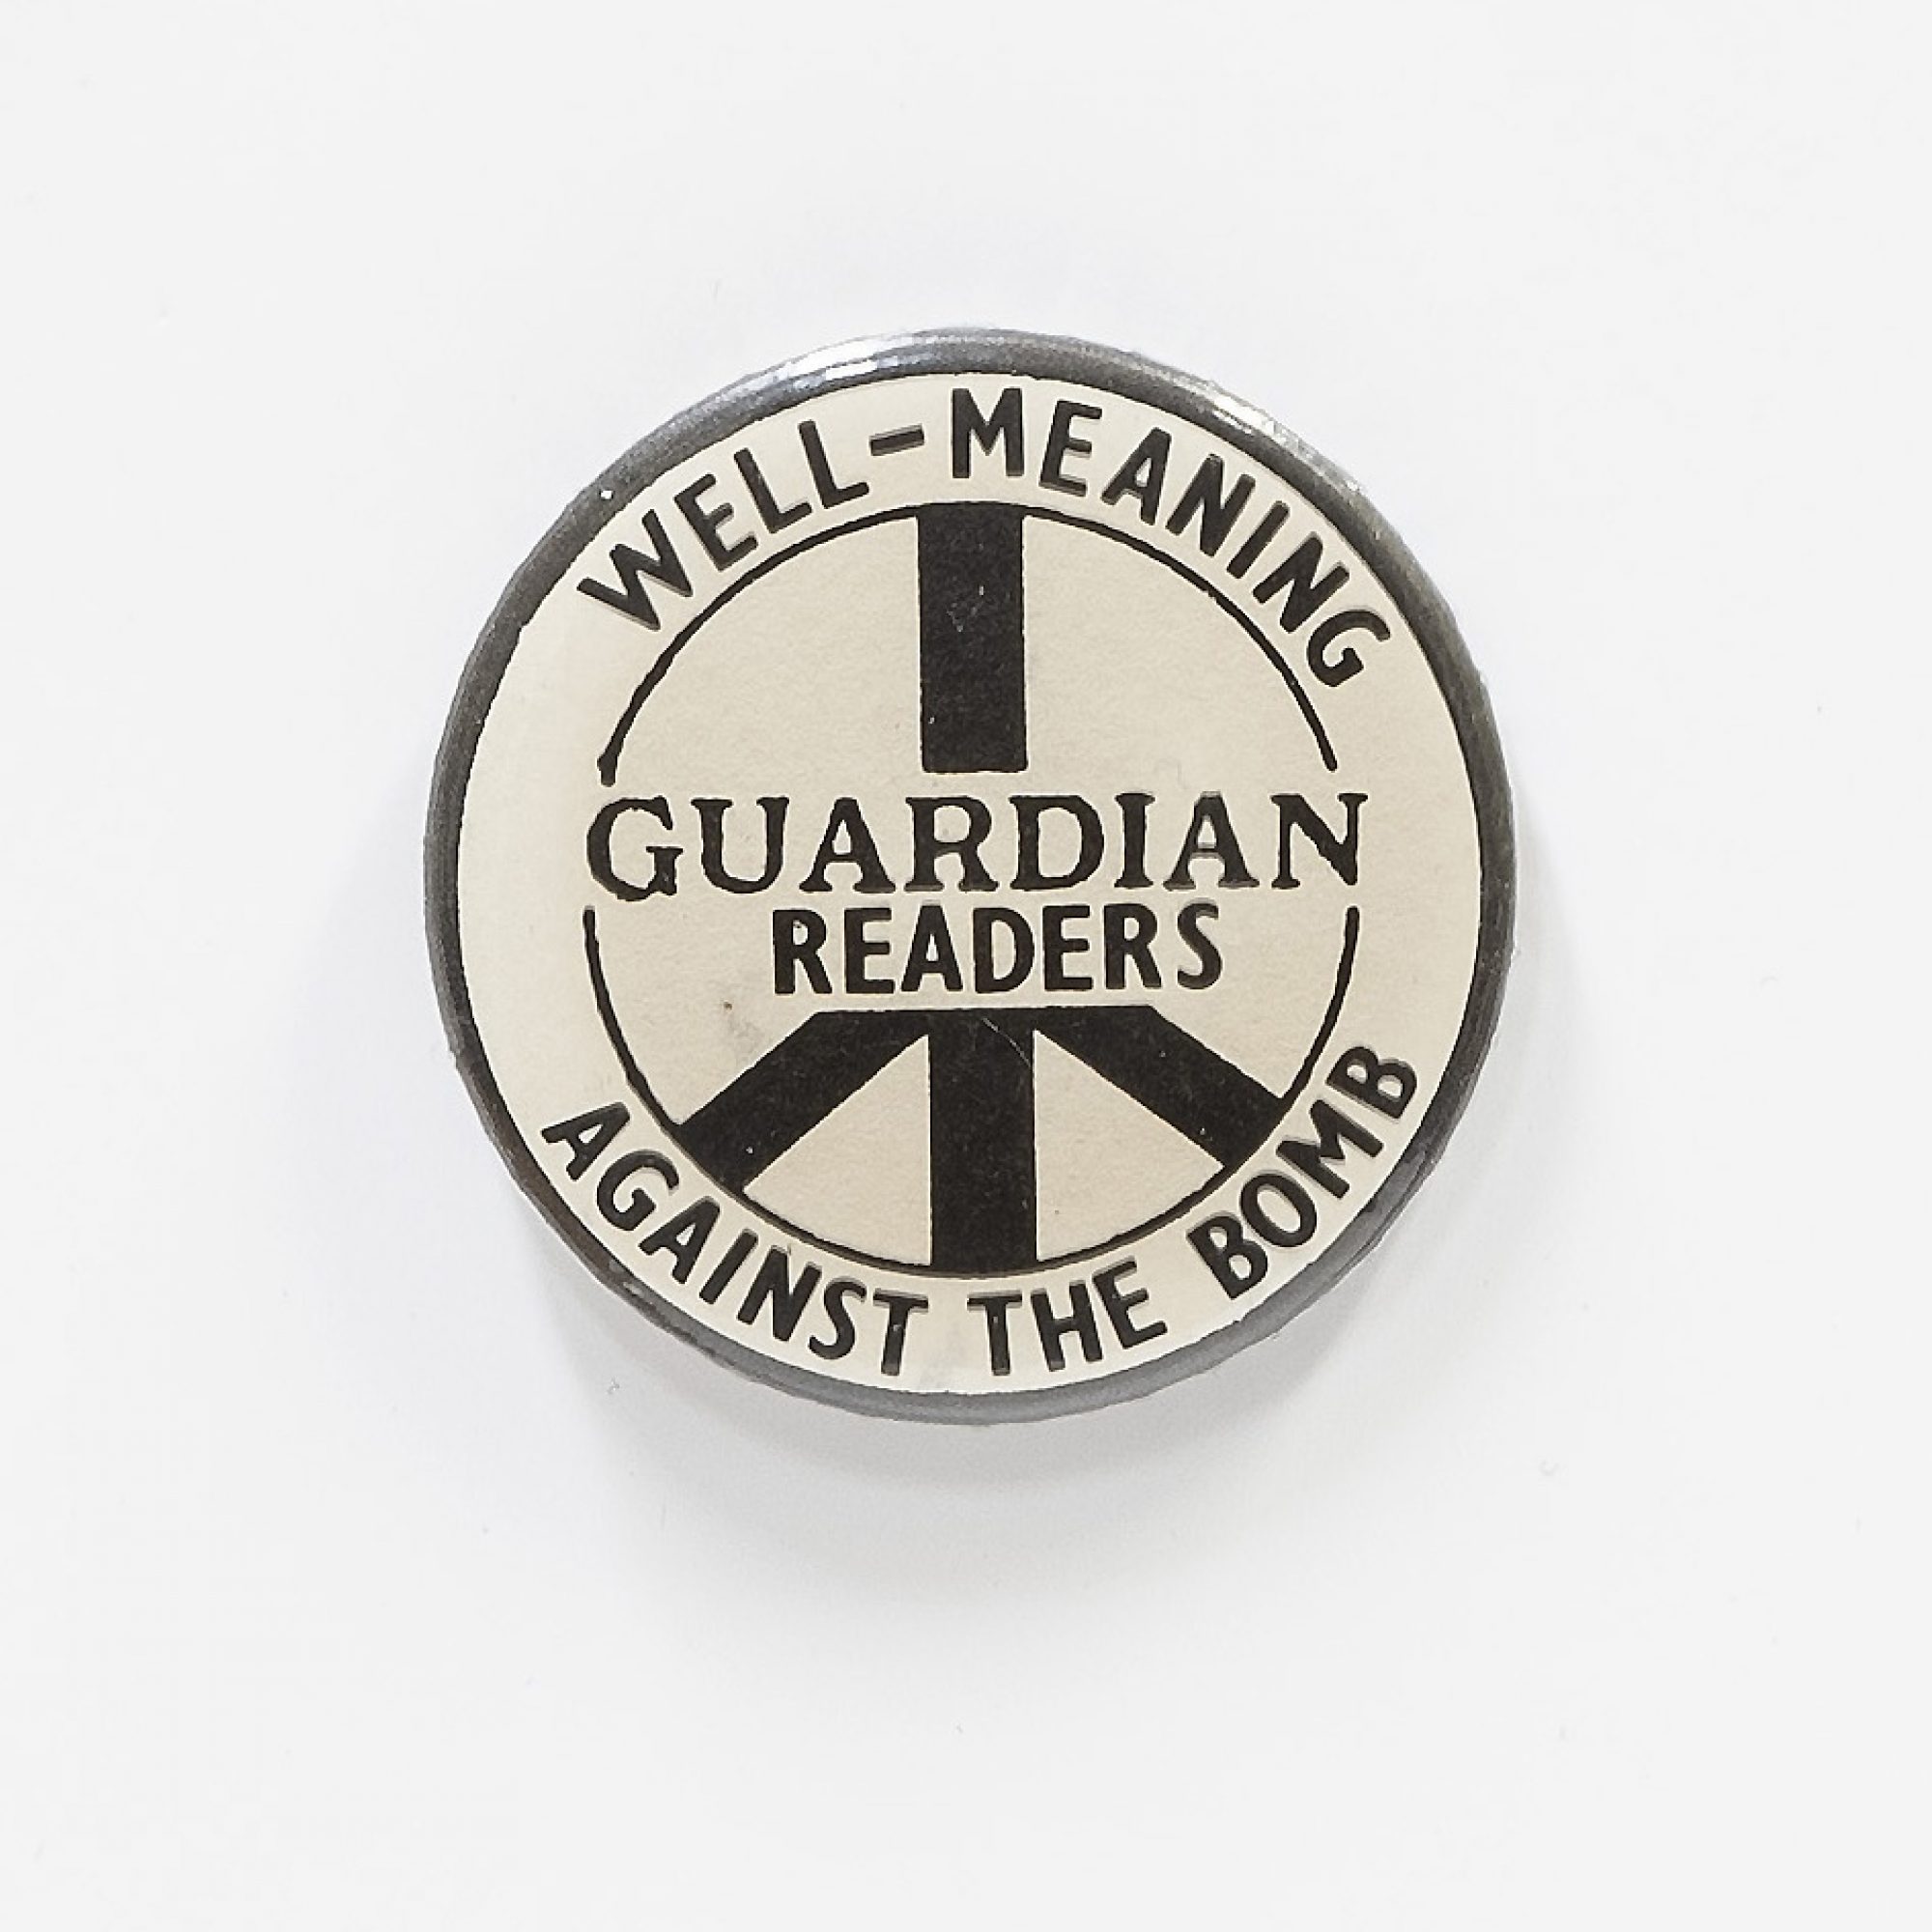 Well-Meaning Guardian Readers Against The Bomb badge